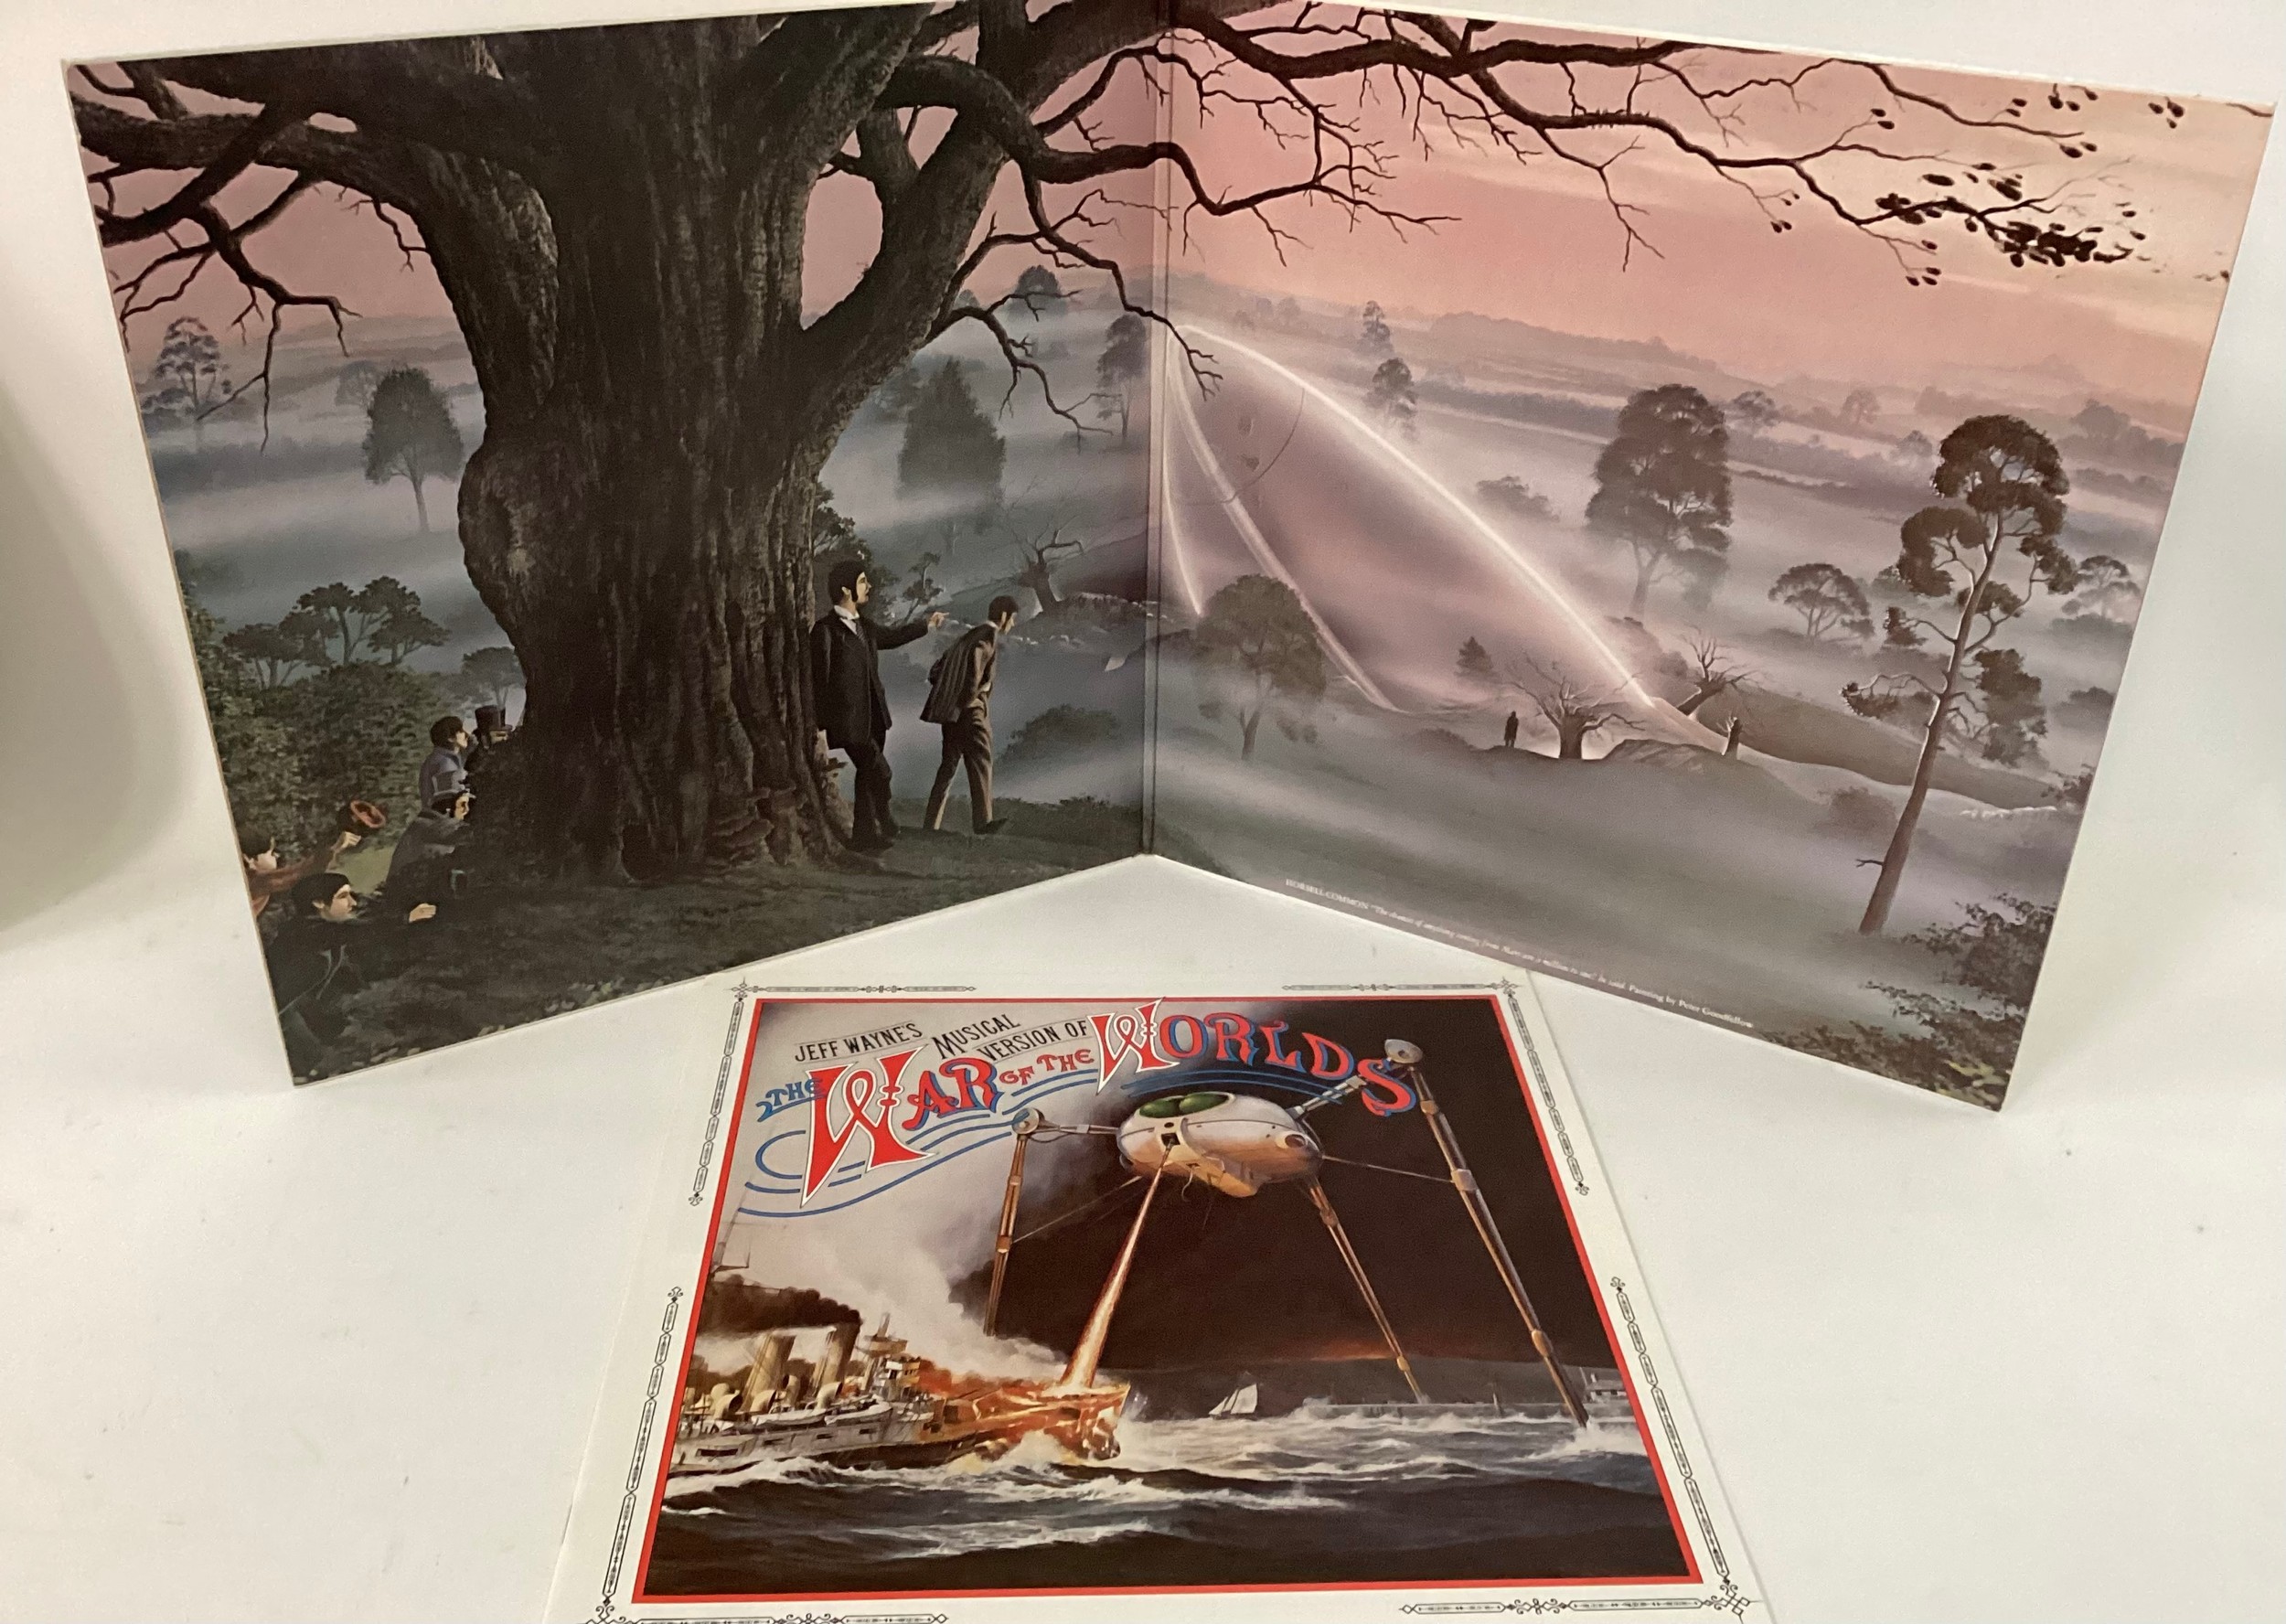 WAR OF THE WORLDS SOUNDTRACK VINYL DOUBLE ALBUM. A fantastic copy of this Jeff Wayne’s Musical on - Image 3 of 3